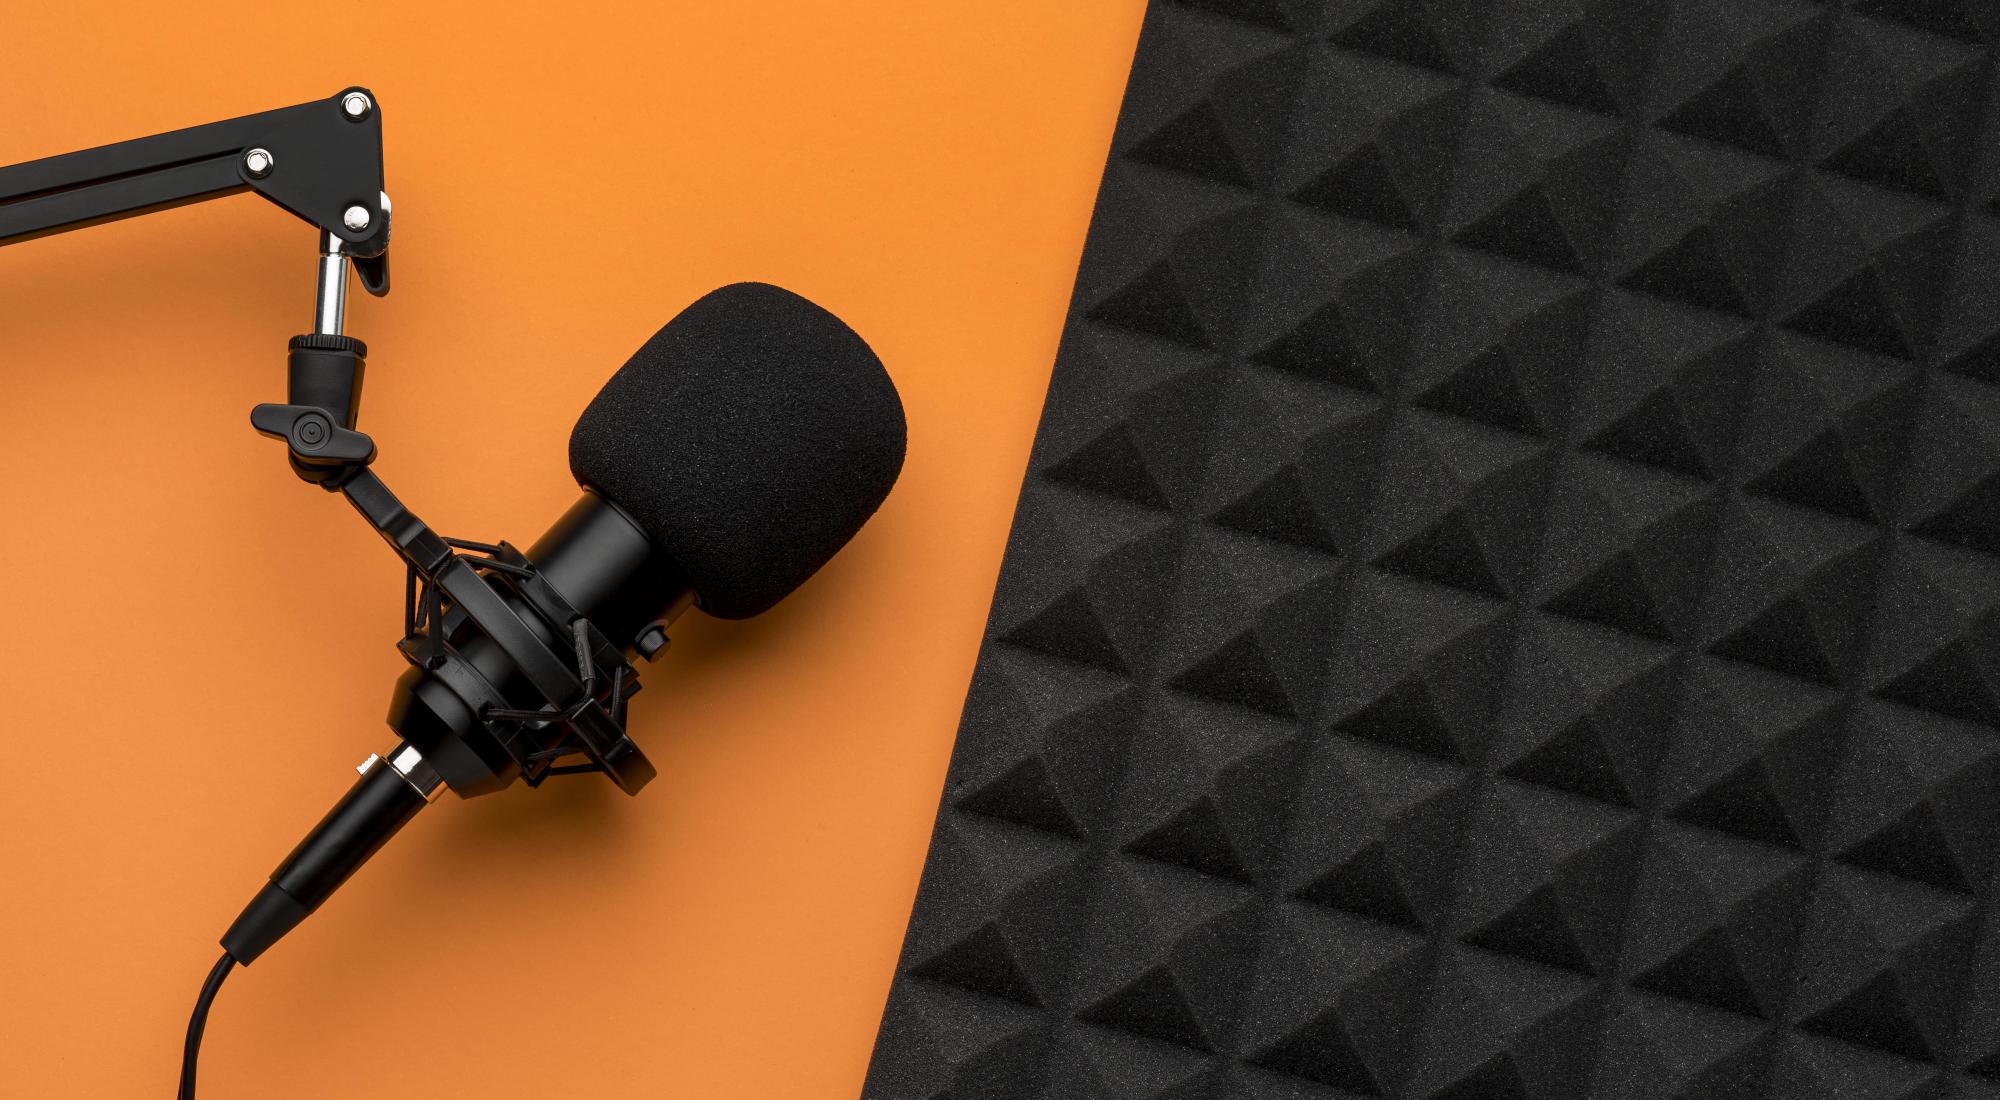 From Podcasts to Game Streams: The 5 Must-Have Microphones in 2023